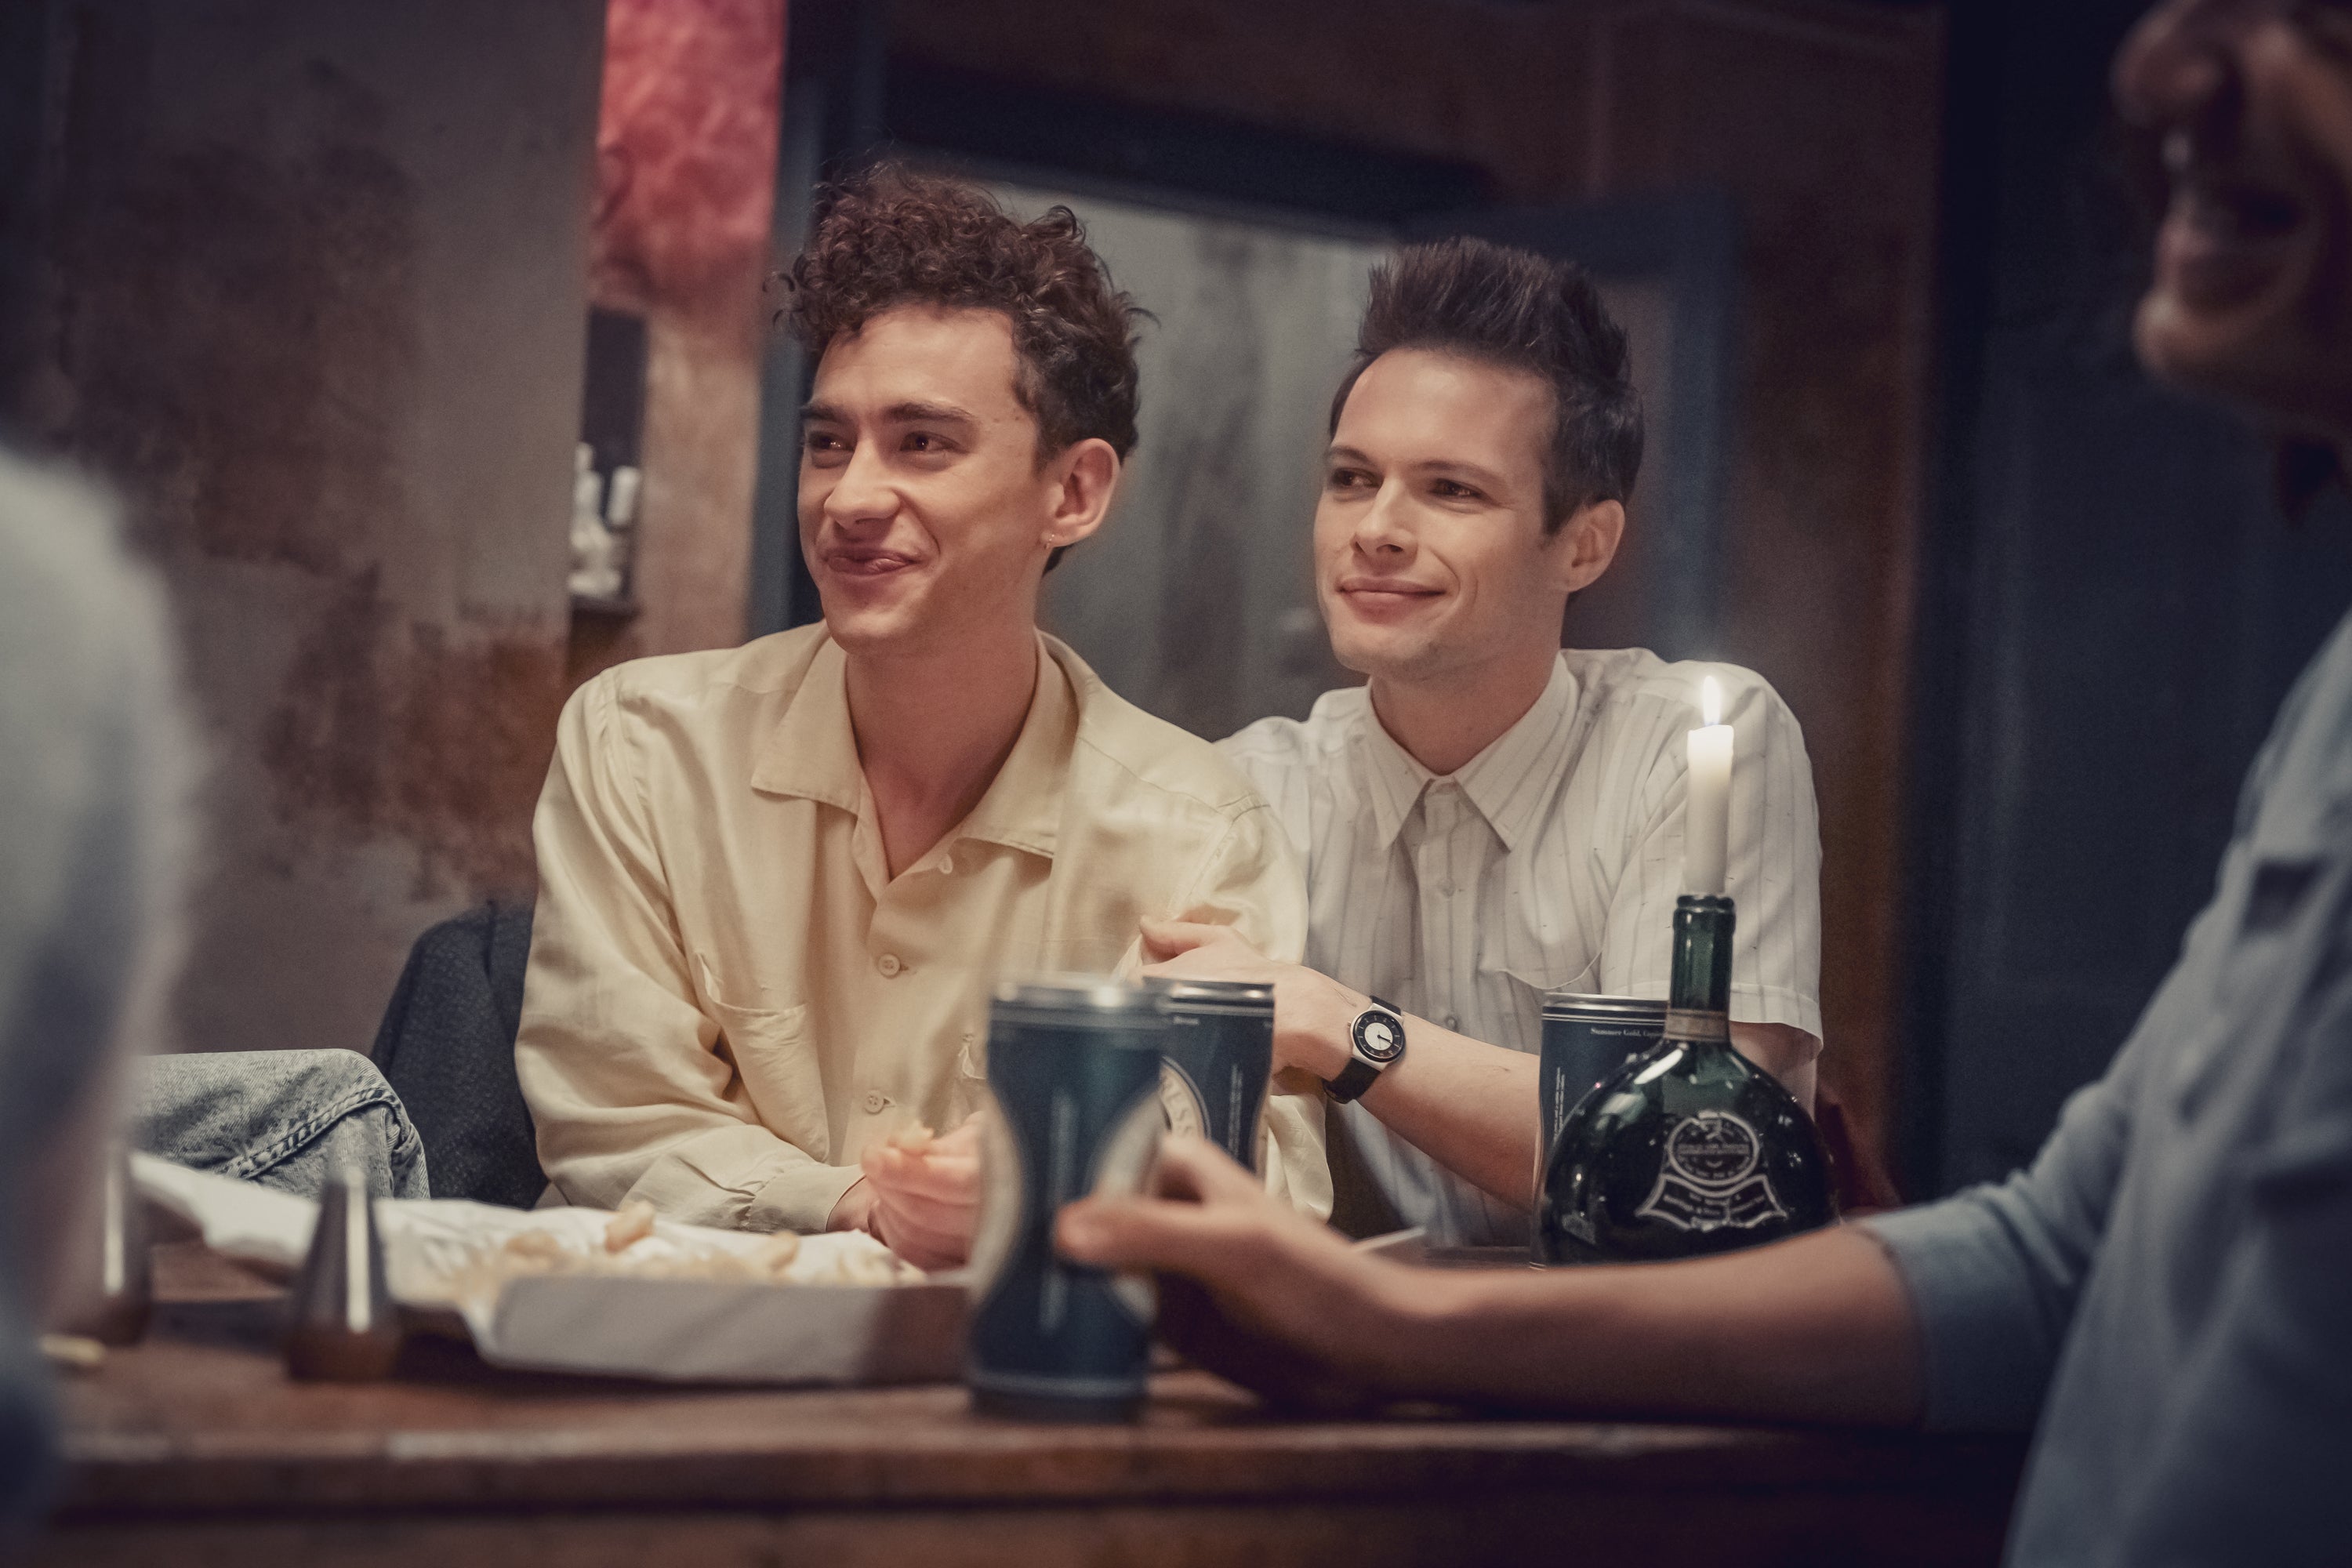 Ritchie Tozer (Olly Alexander), left, and Donald Bassett (Nathaniel Hall) in ‘It’s a Sin’